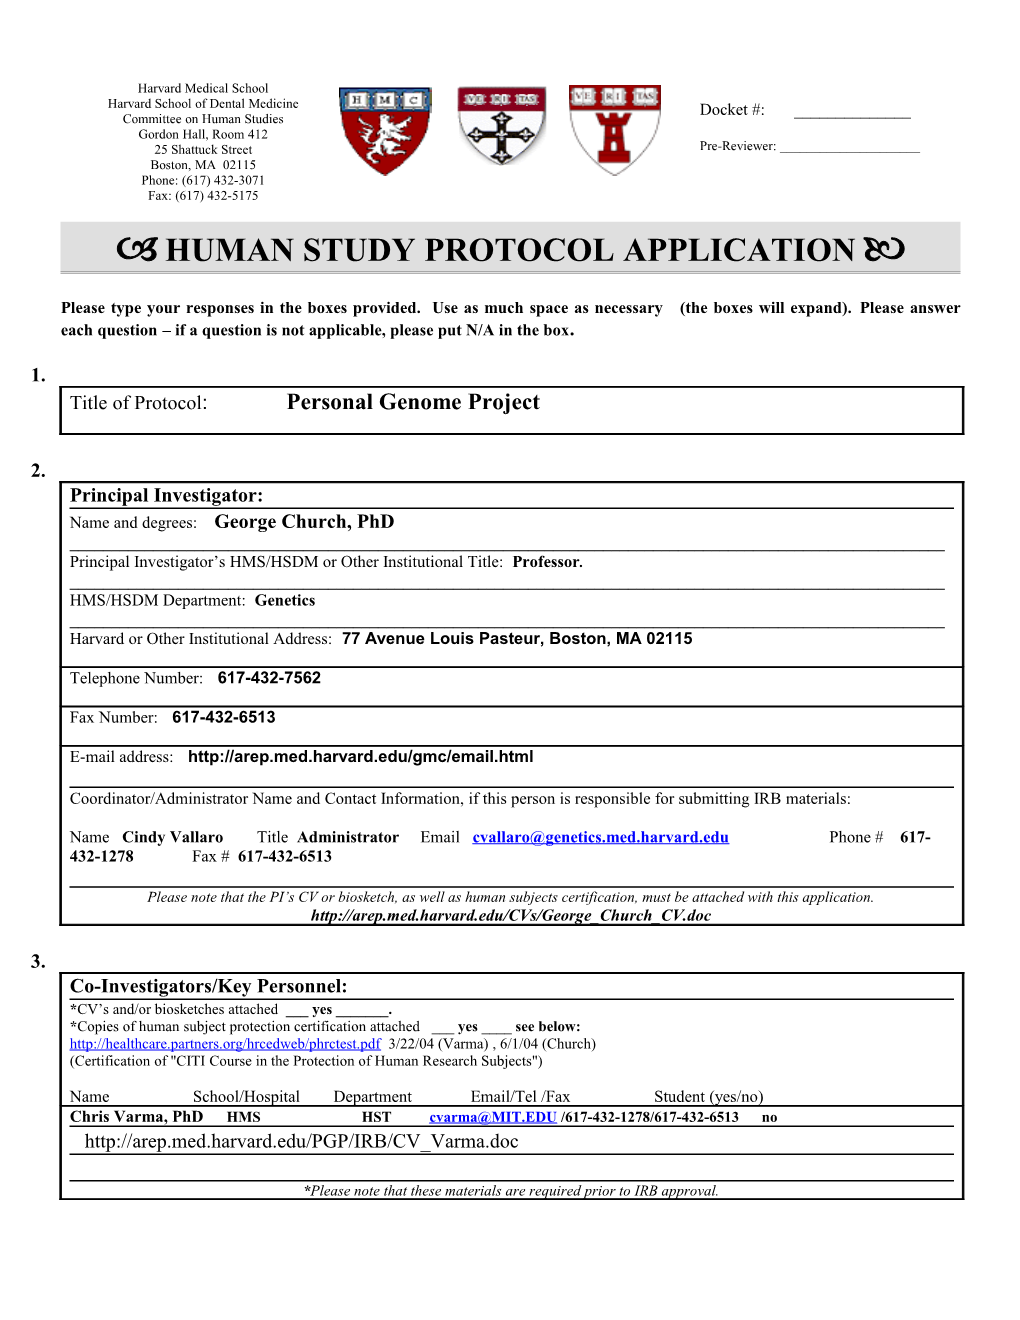 Human Subjects Application